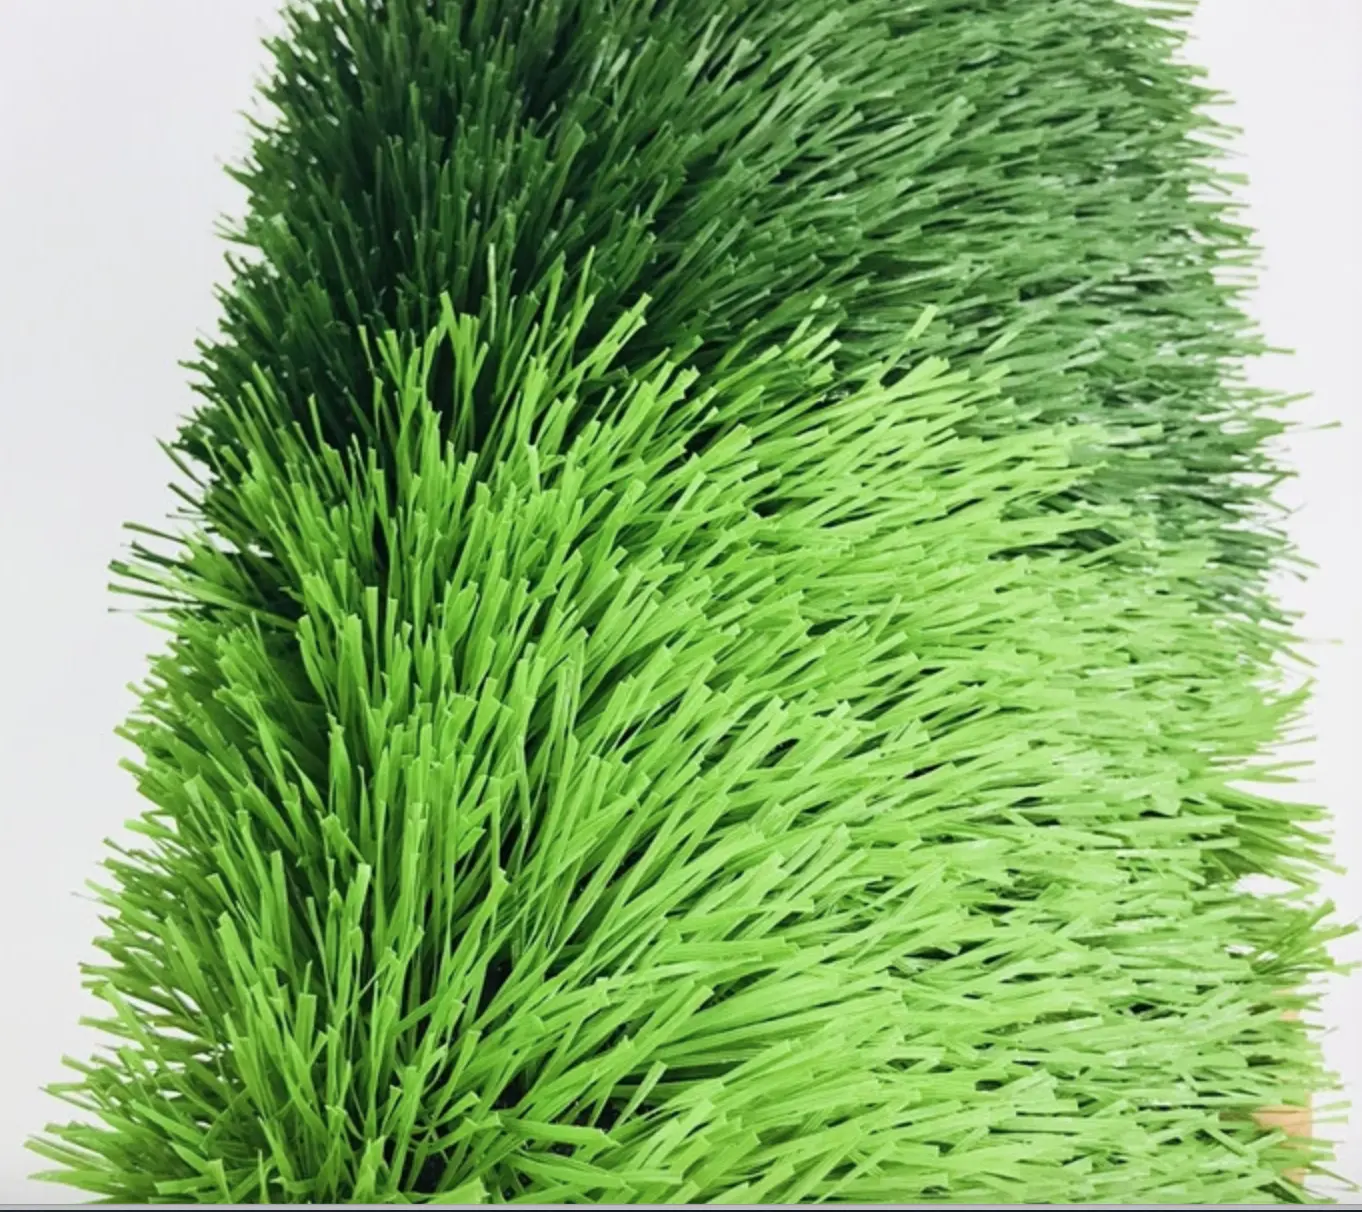 2021 NWT football grass carpet use for outdoor indoor sports field ground